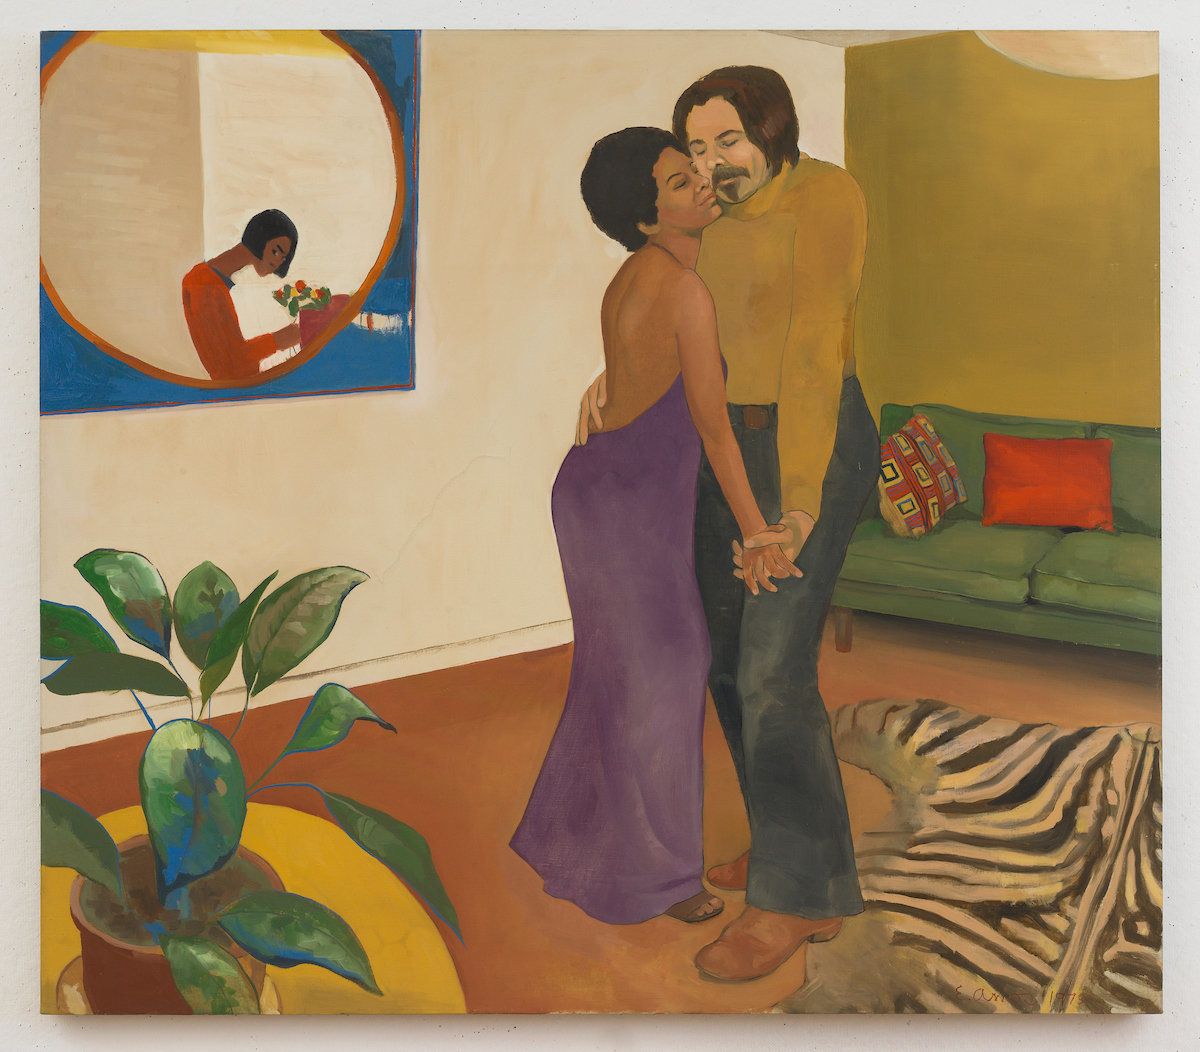 Emma Amos (America, born 1938), "Sandy and Her Husband," 1973, oil on canvas, 44.25 x 50.25 inches.